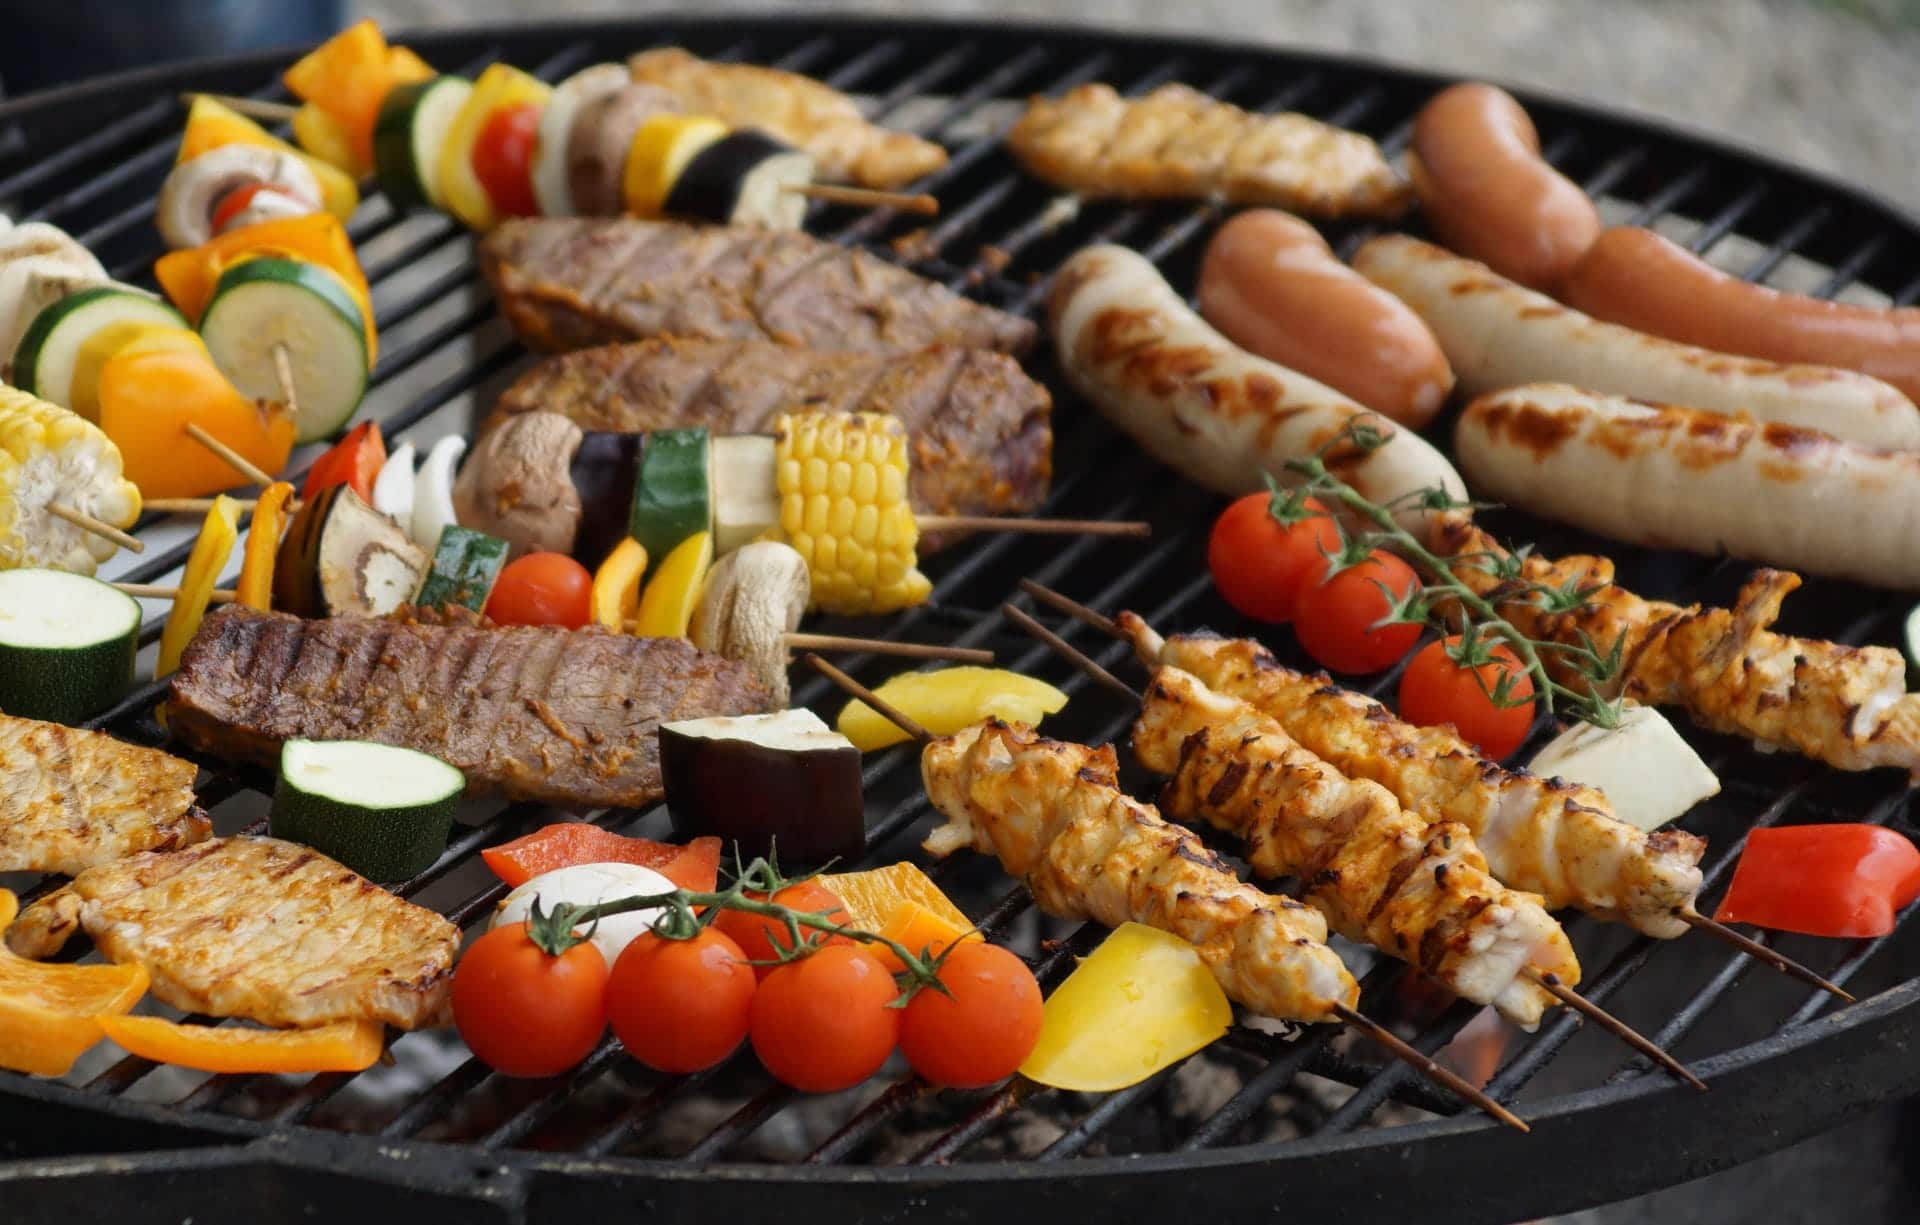 Meat and vegetables cooking on a grill